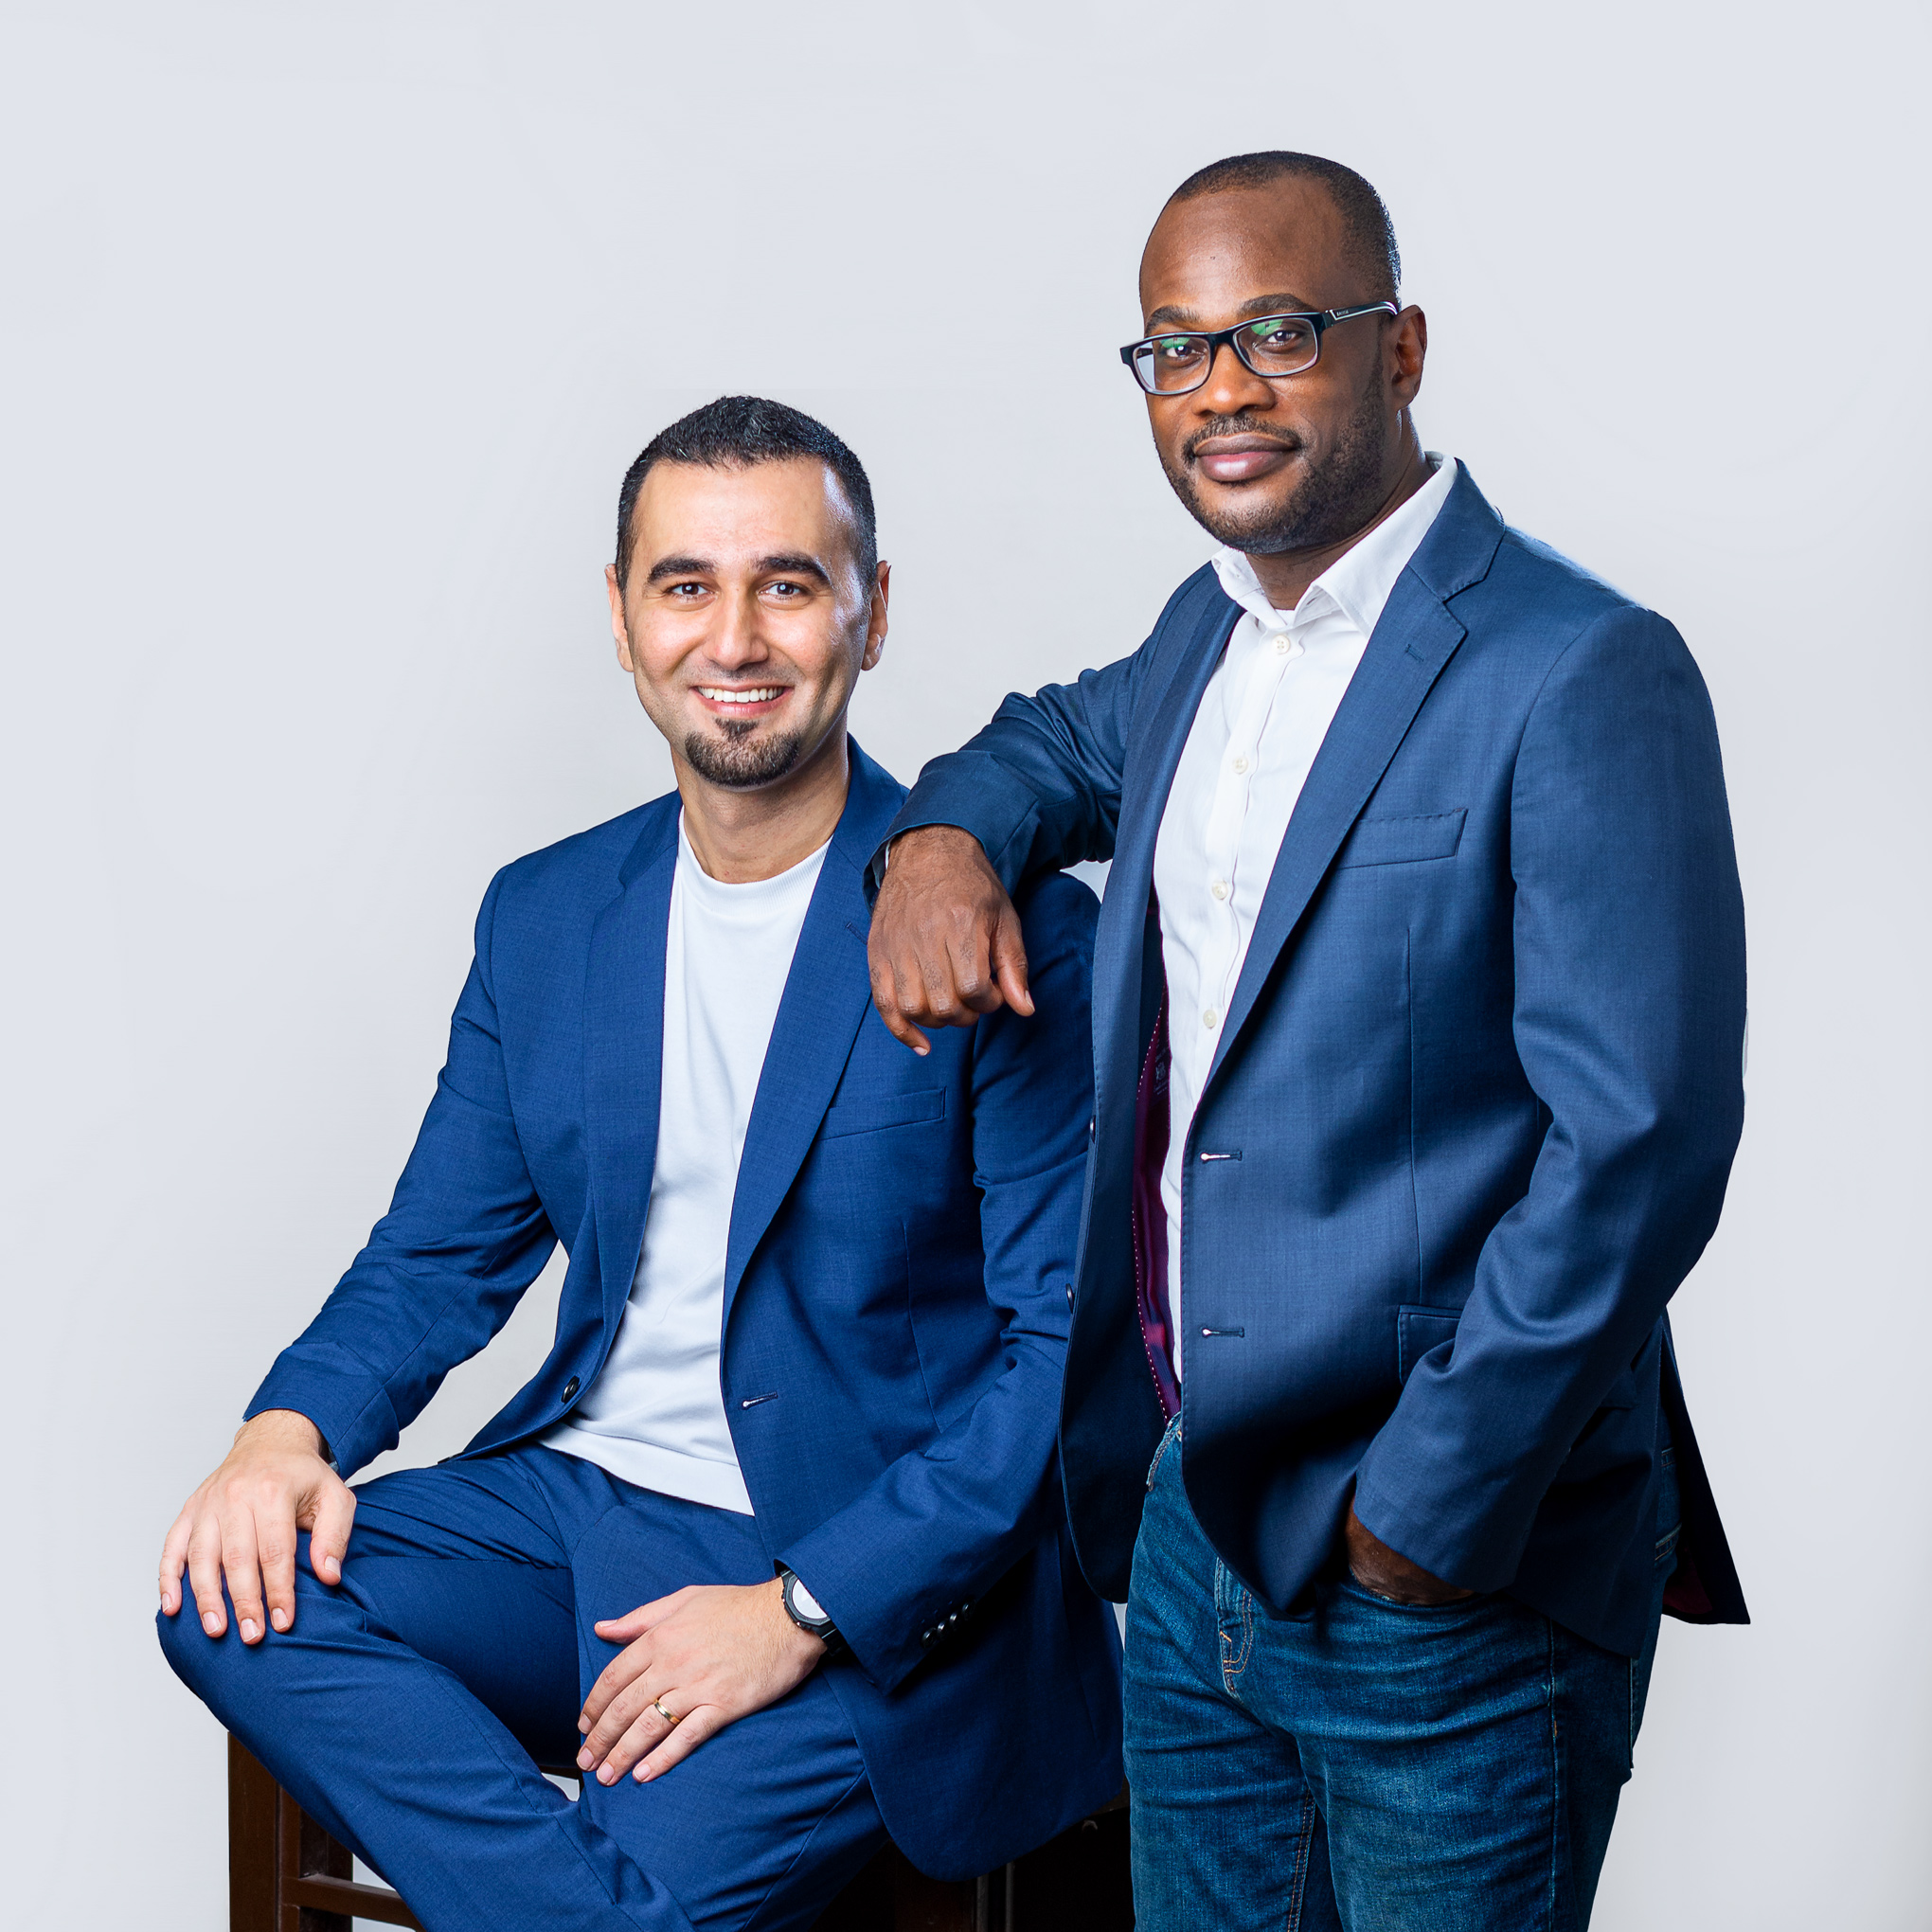 Nigeria’s e-Health Pharmaceutical Company,Drugstoc Secures $4.4M In Series A Funding To Expand Access To Quality Of Products And Services